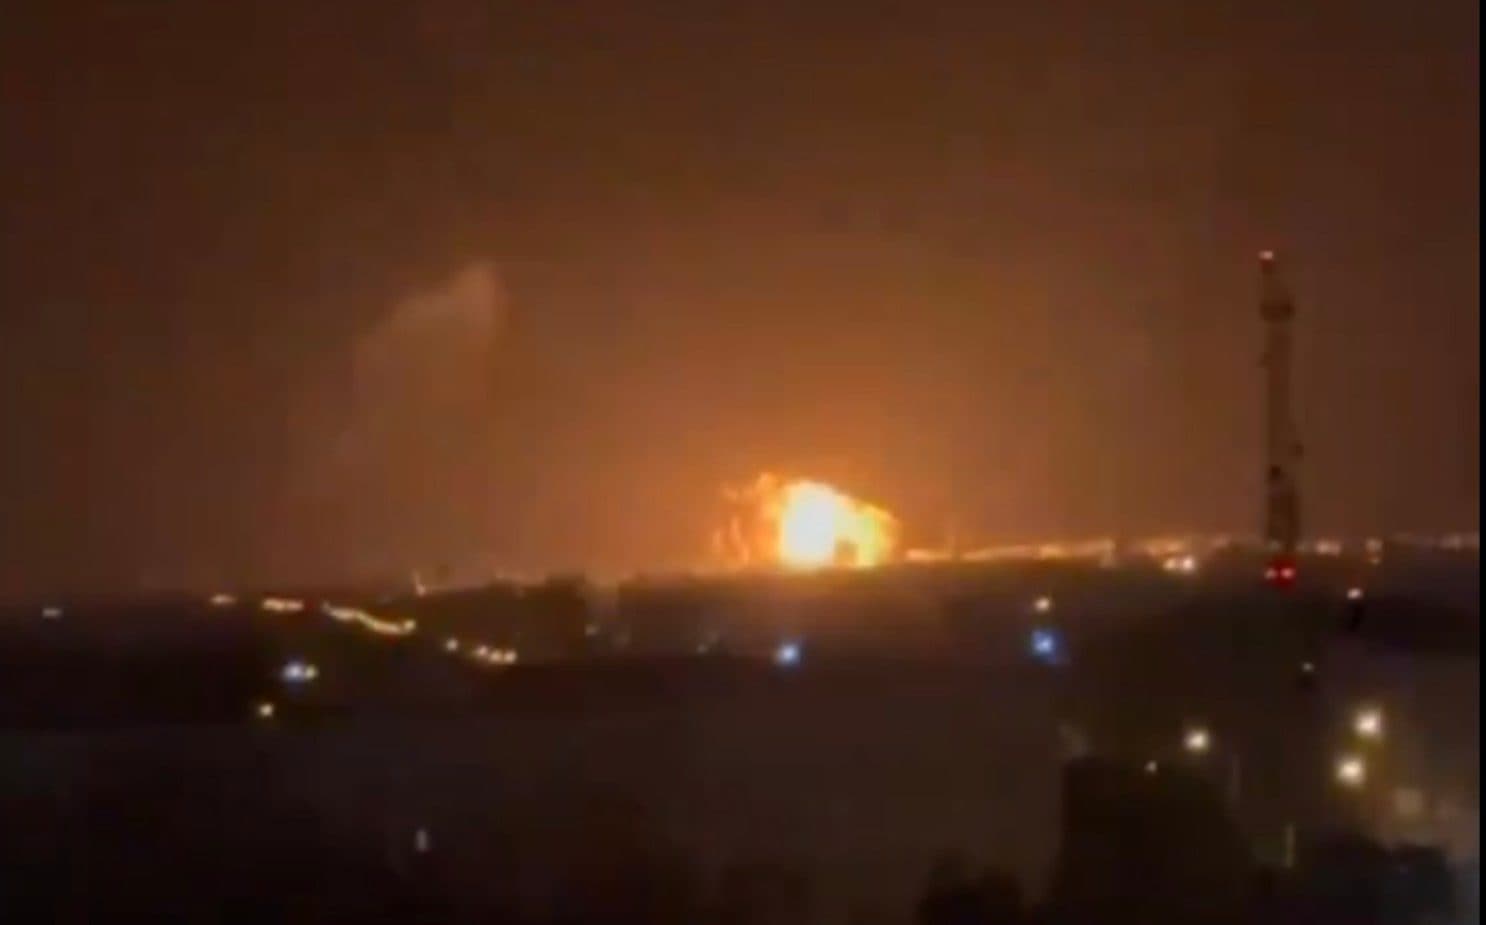 Ukrainian drones strike oil refineries and airfield in major overnight attack